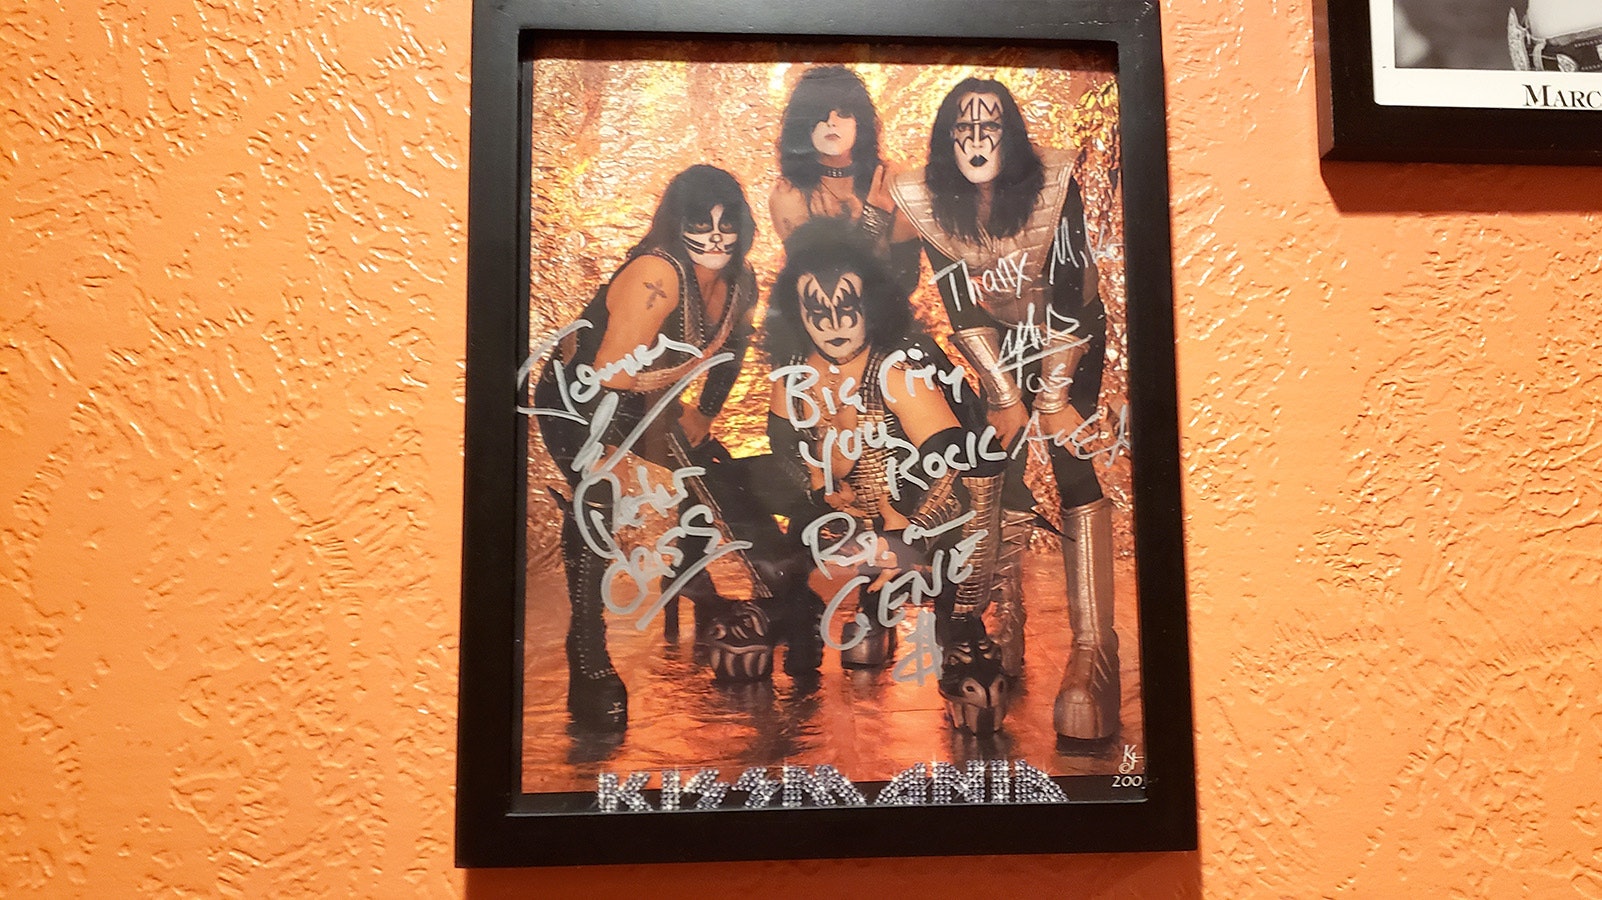 Rock legends KISS ate at Michael's Big City Steakhouse in Rawlins.